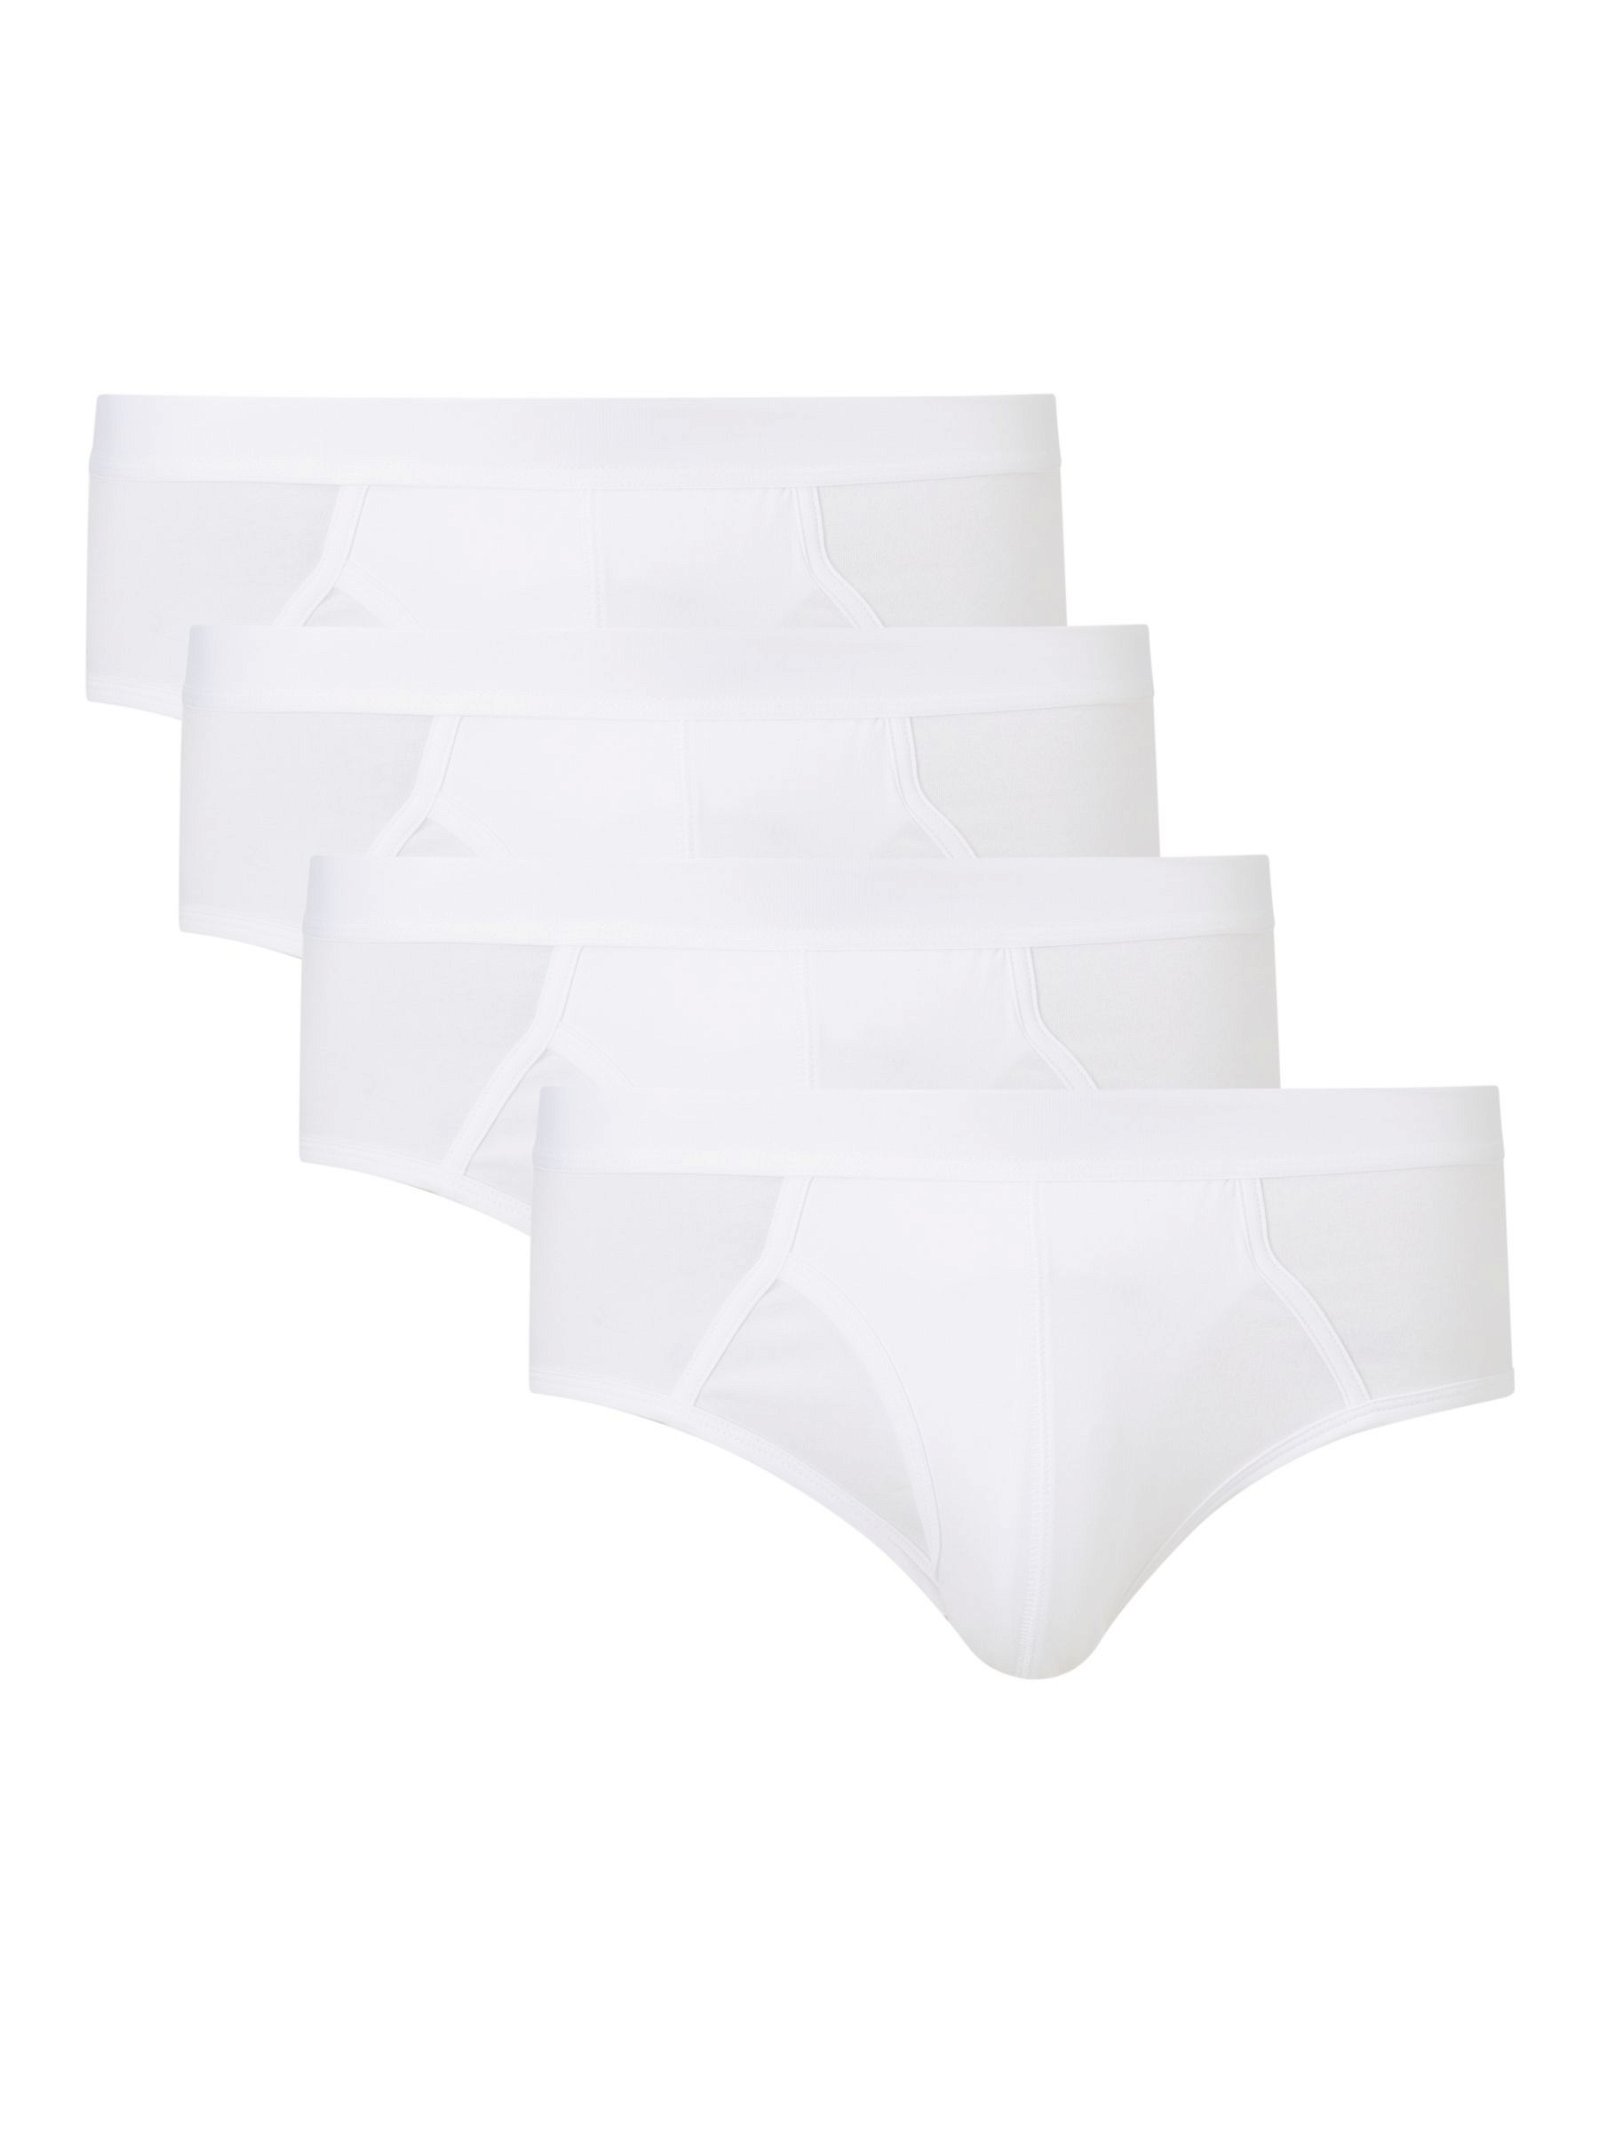 JOHN LEWIS Organic Cotton Keyhole Briefs, Pack of 4 in White